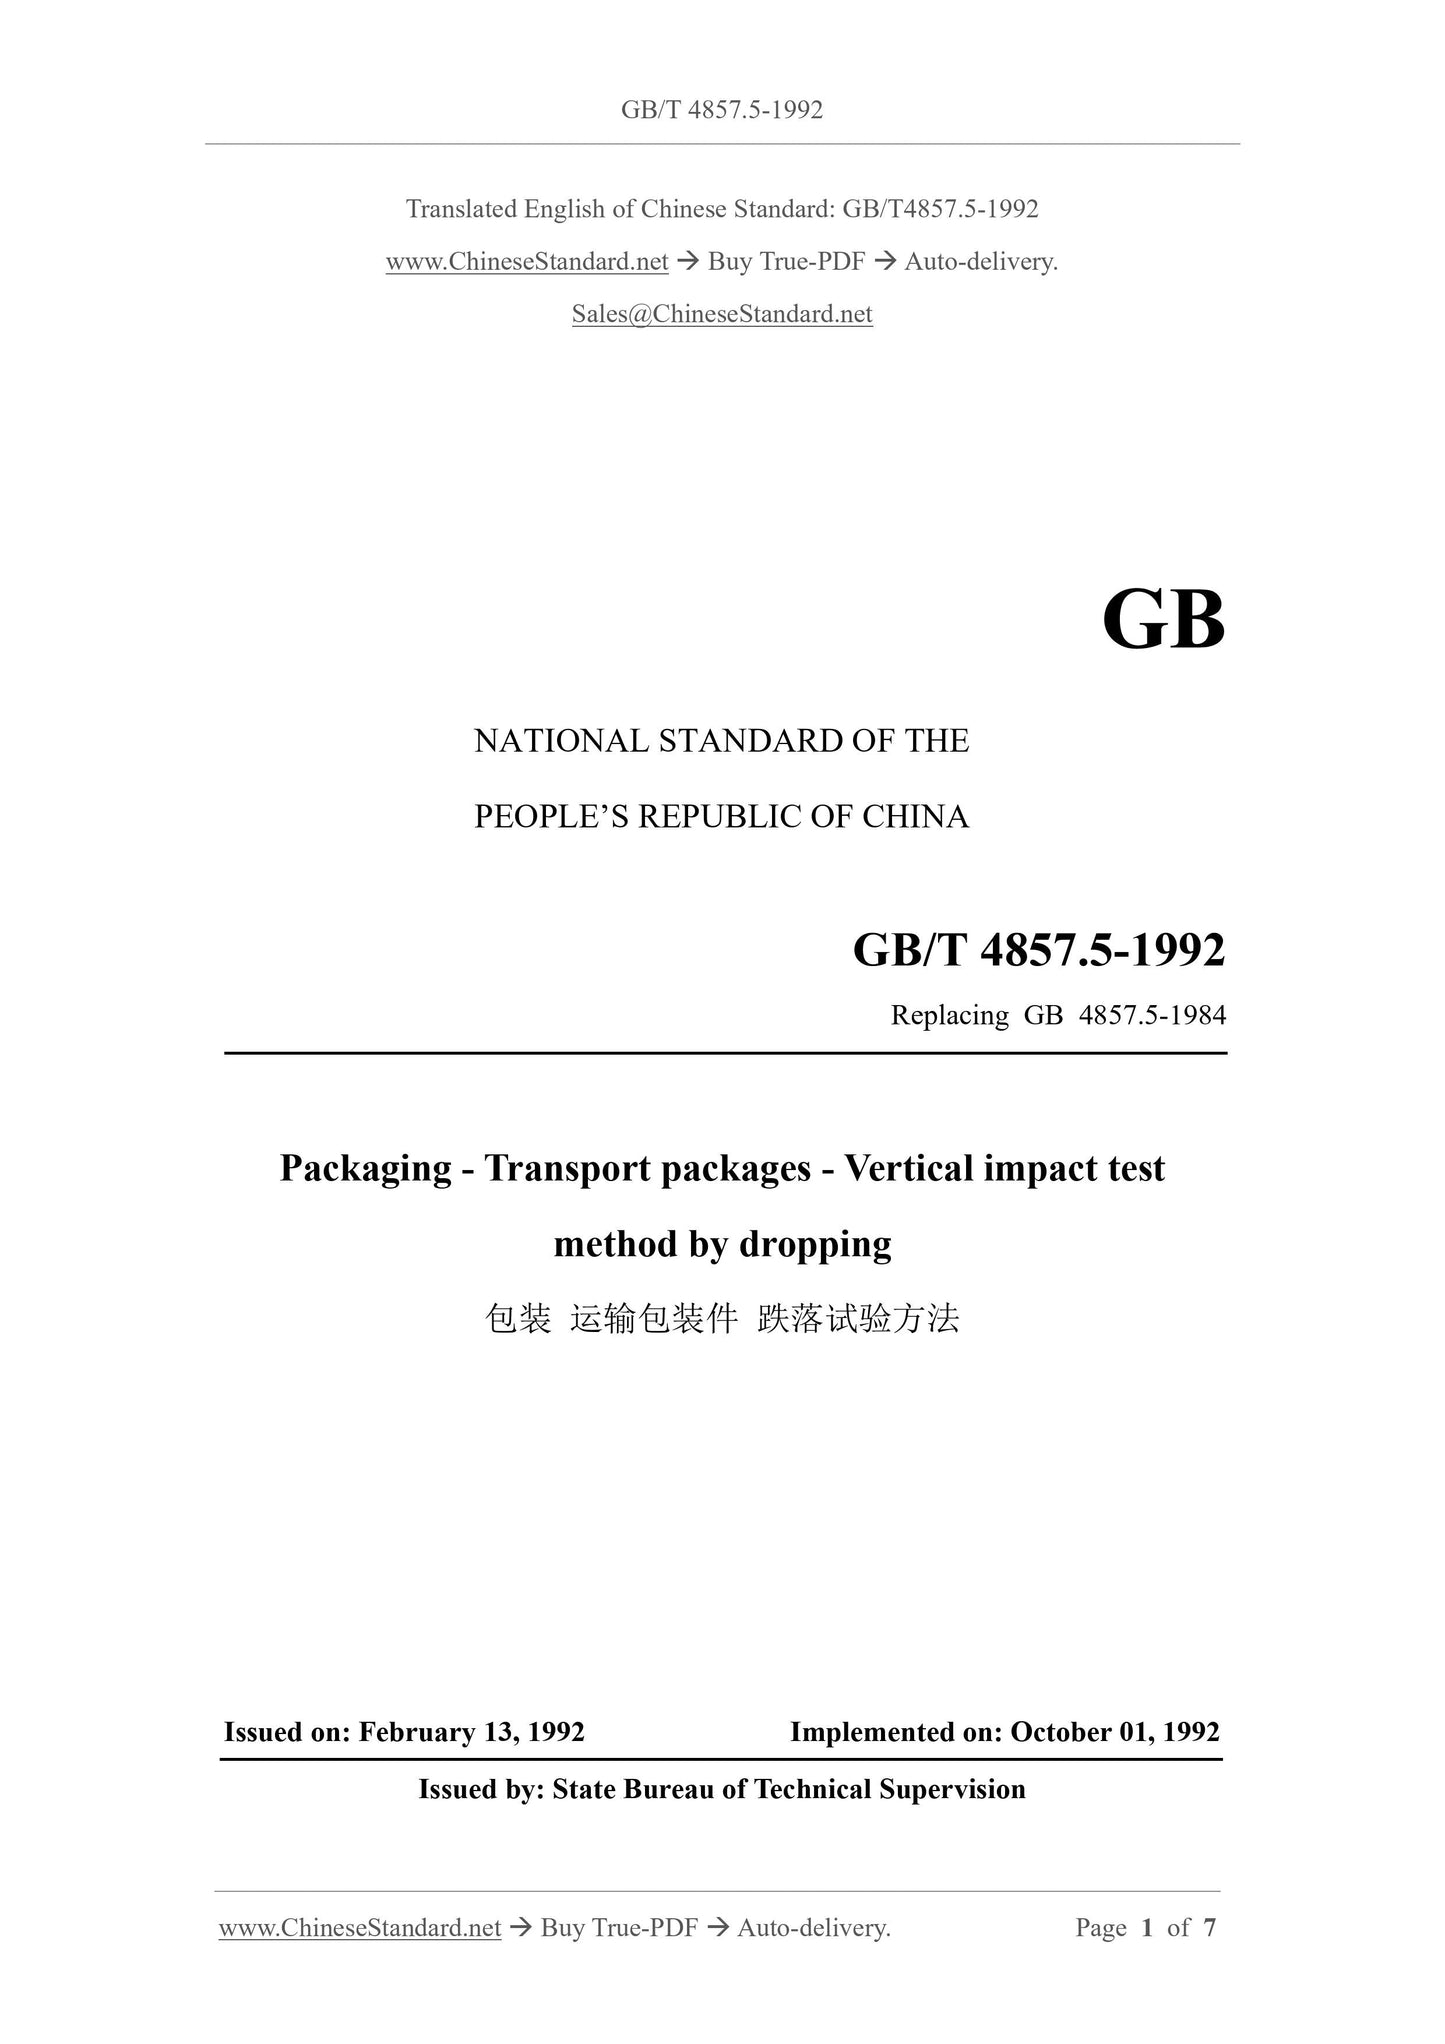 GB/T 4857.5-1992 Page 1